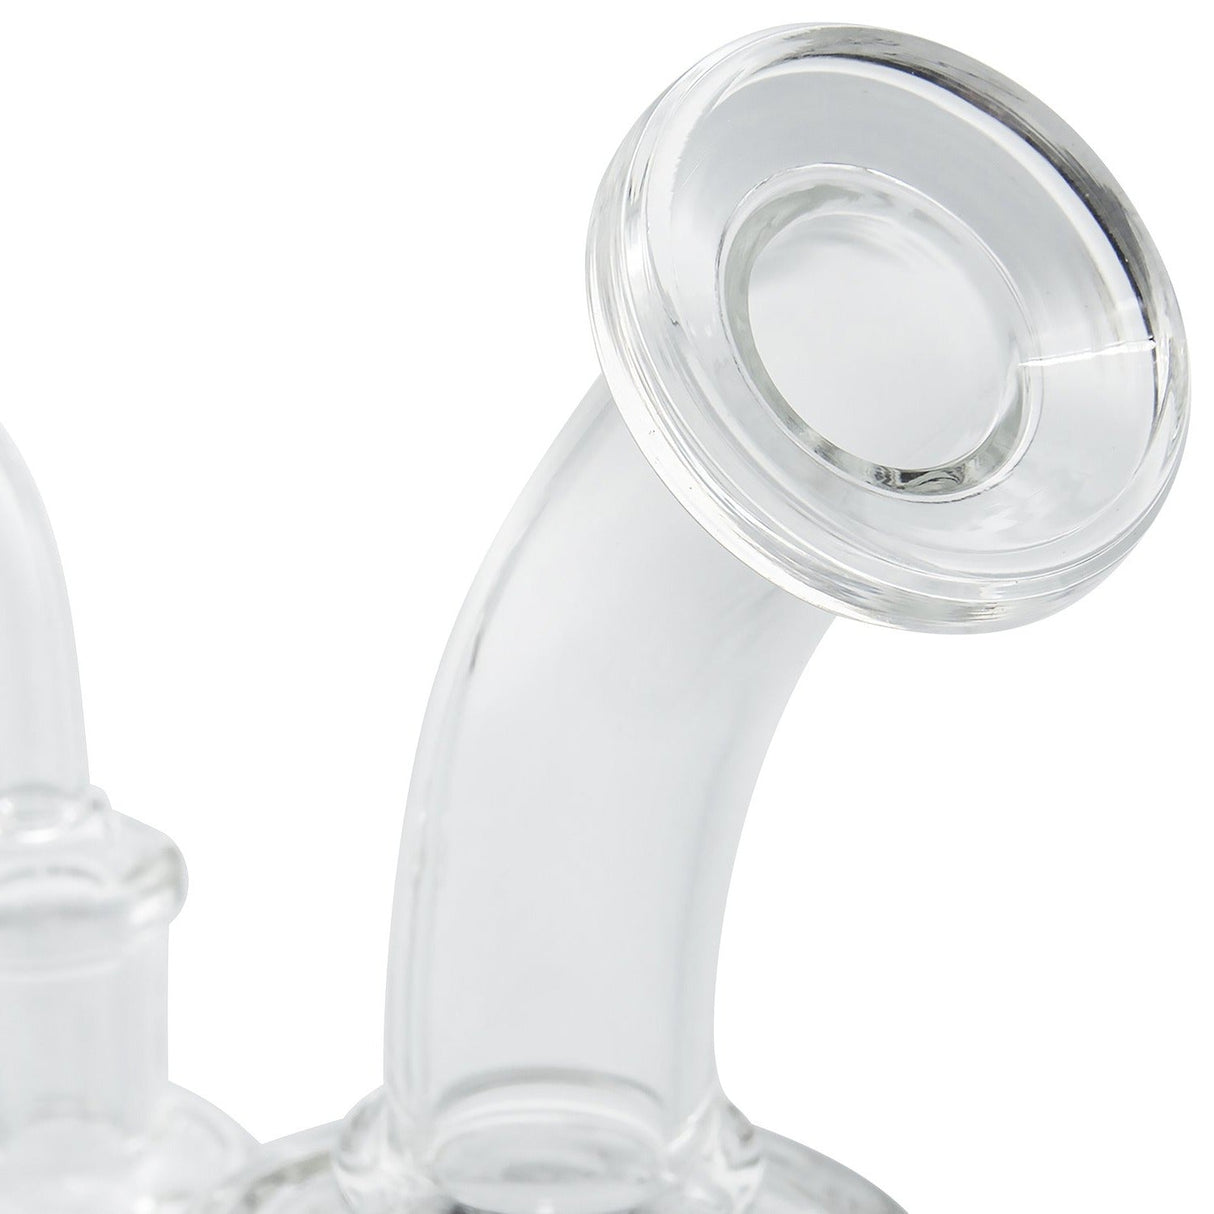 Close-up side view of Crystal Palace Banger Hanger with polished joint and welded stem, made of borosilicate glass.